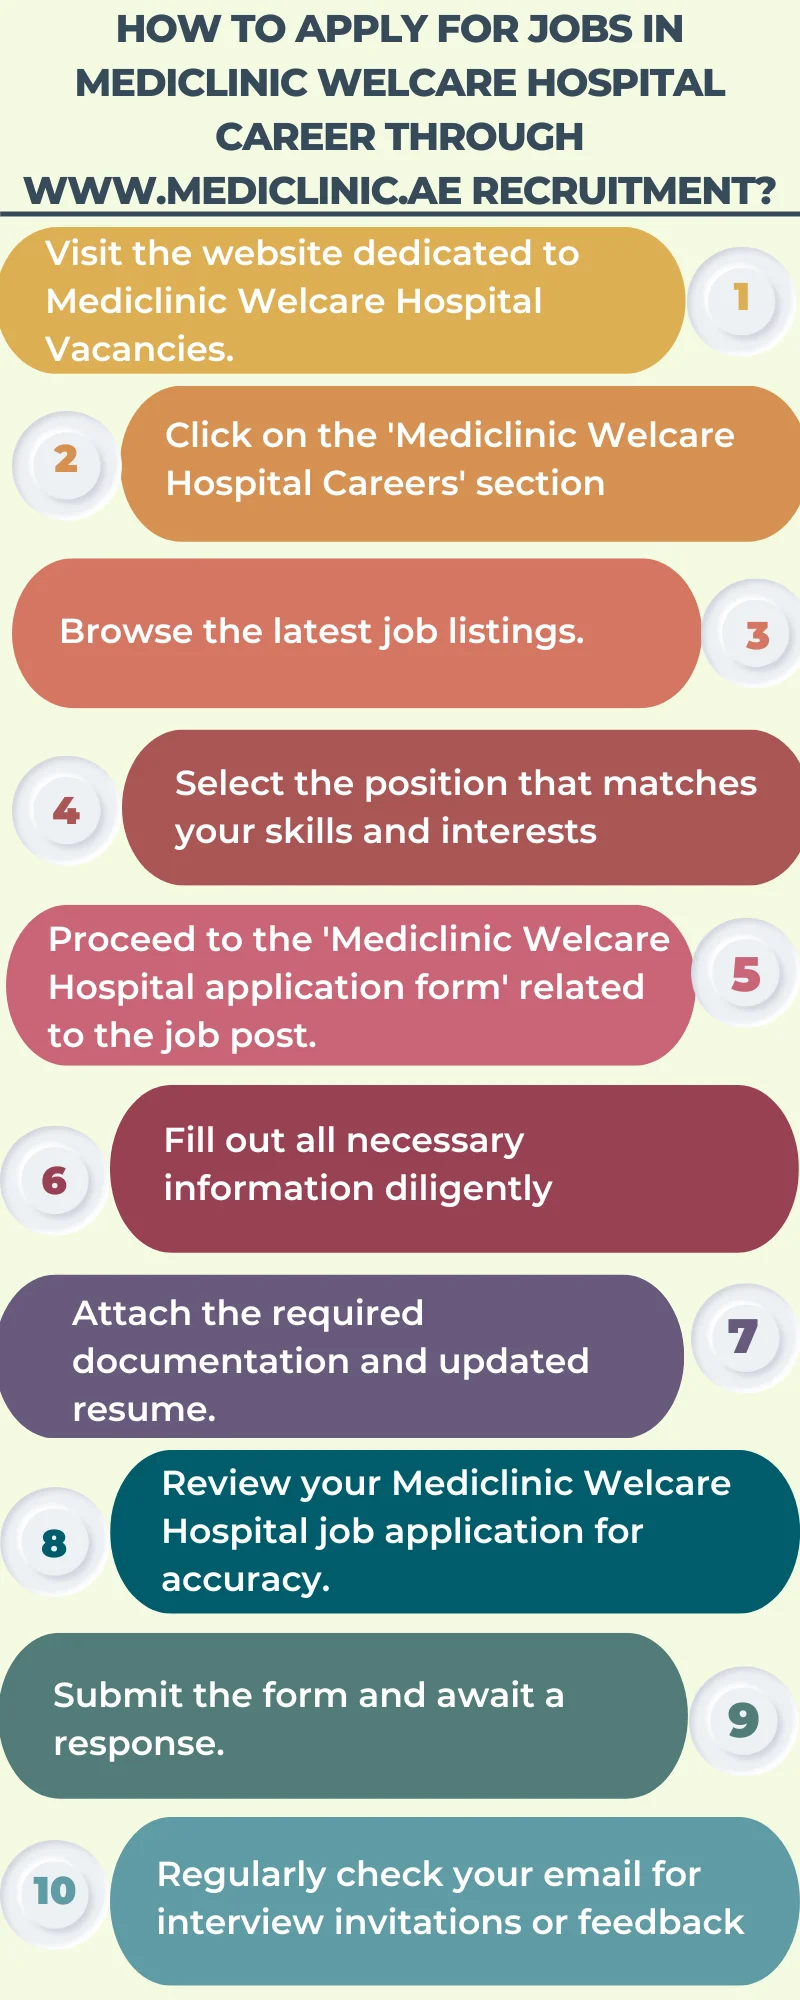 How to Apply for Jobs in Mediclinic Welcare Hospital Career through www.mediclinic.ae recruitment_